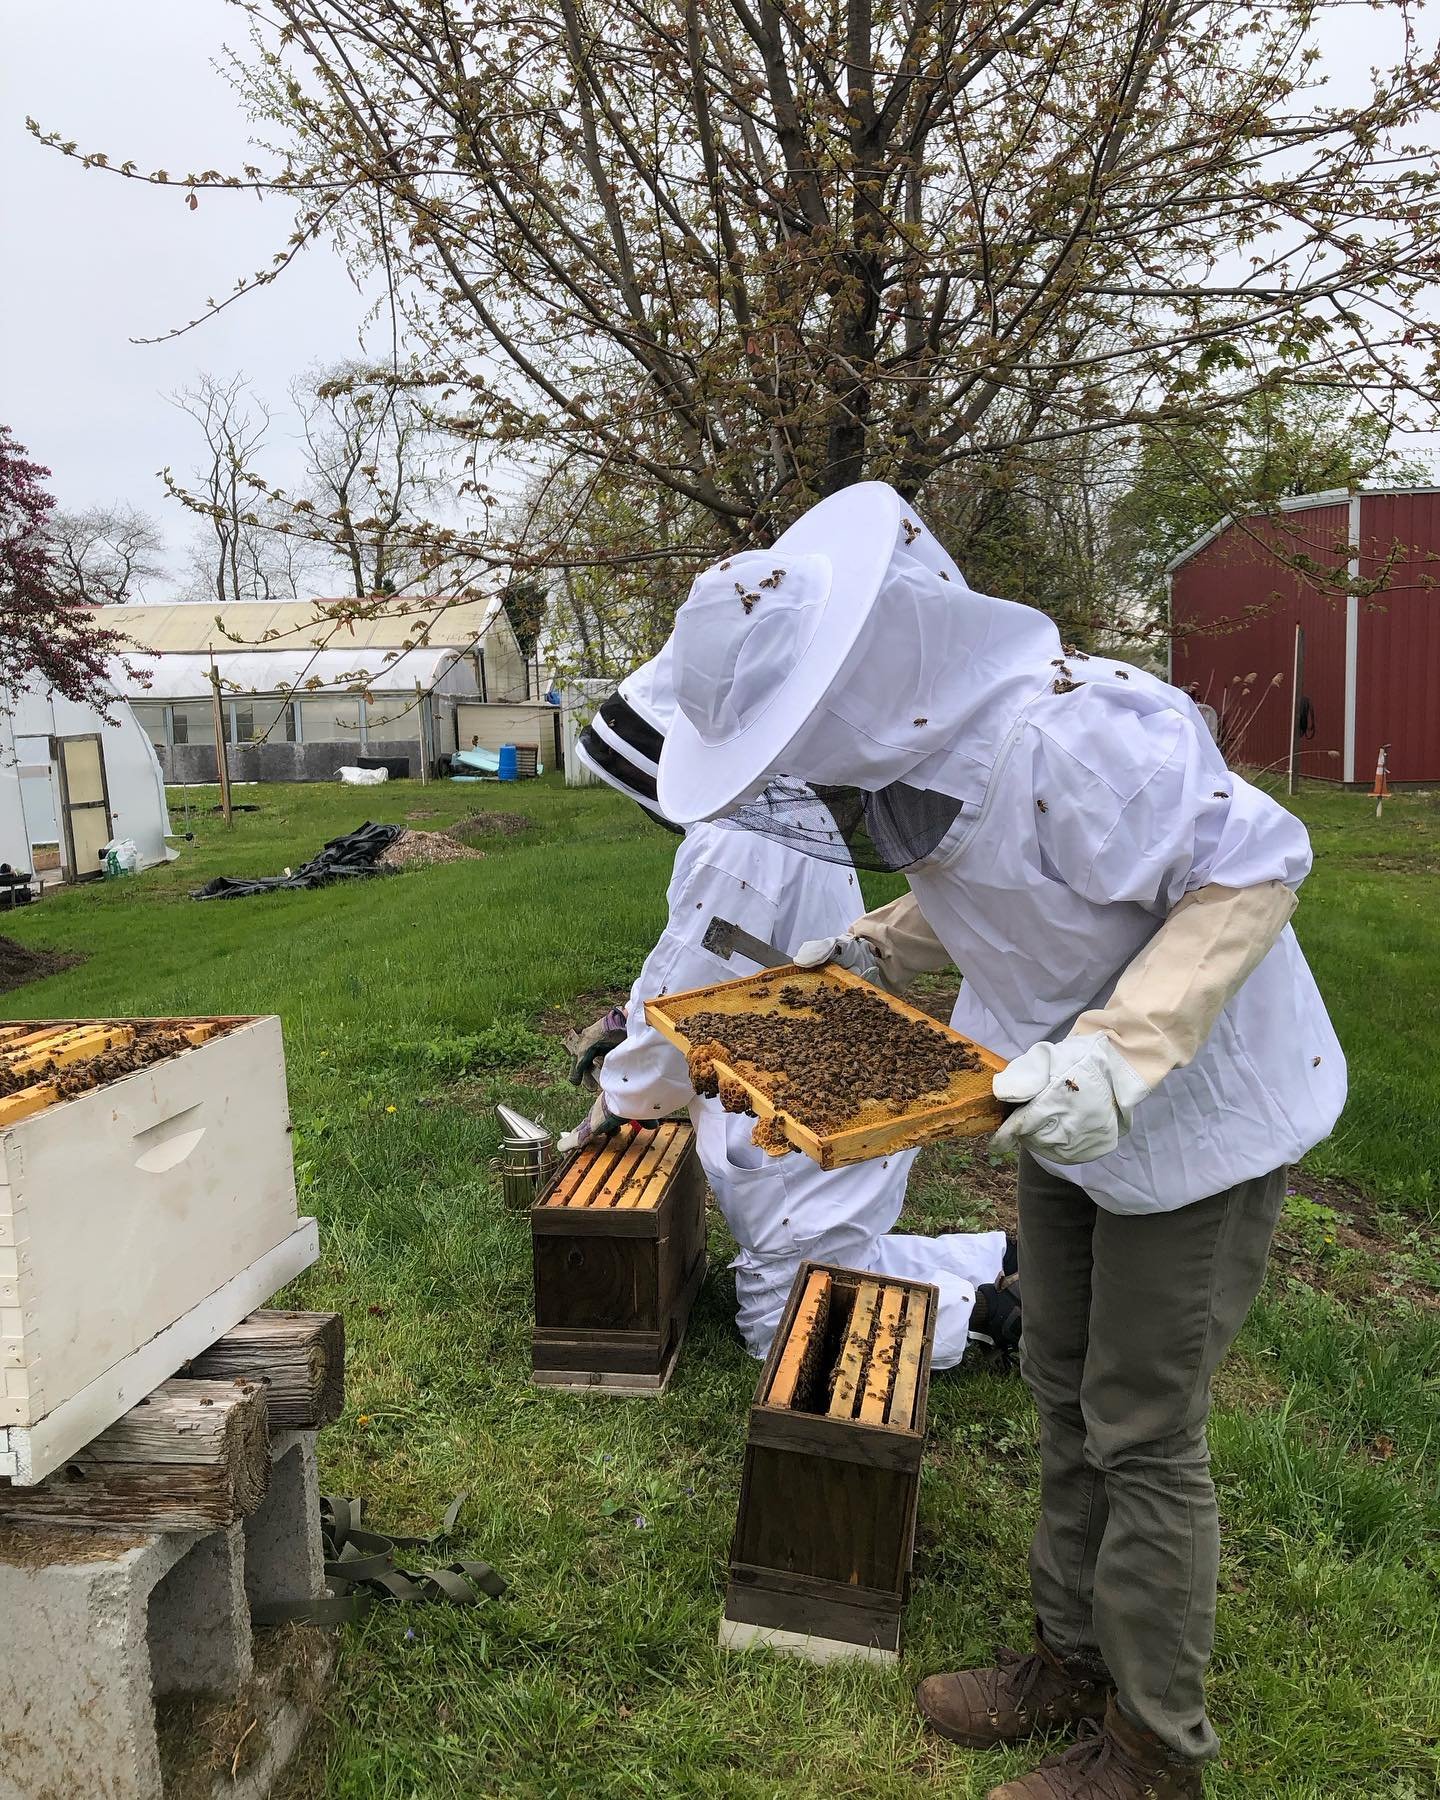 Day 1 of the beekeeping intensive was such a fun experience! Great group who were excited to learn. Looking forward to next month when we meet again and continue to work together.
So much thanks to @calgogardens and @inbloom_at_calgogardens for hosti